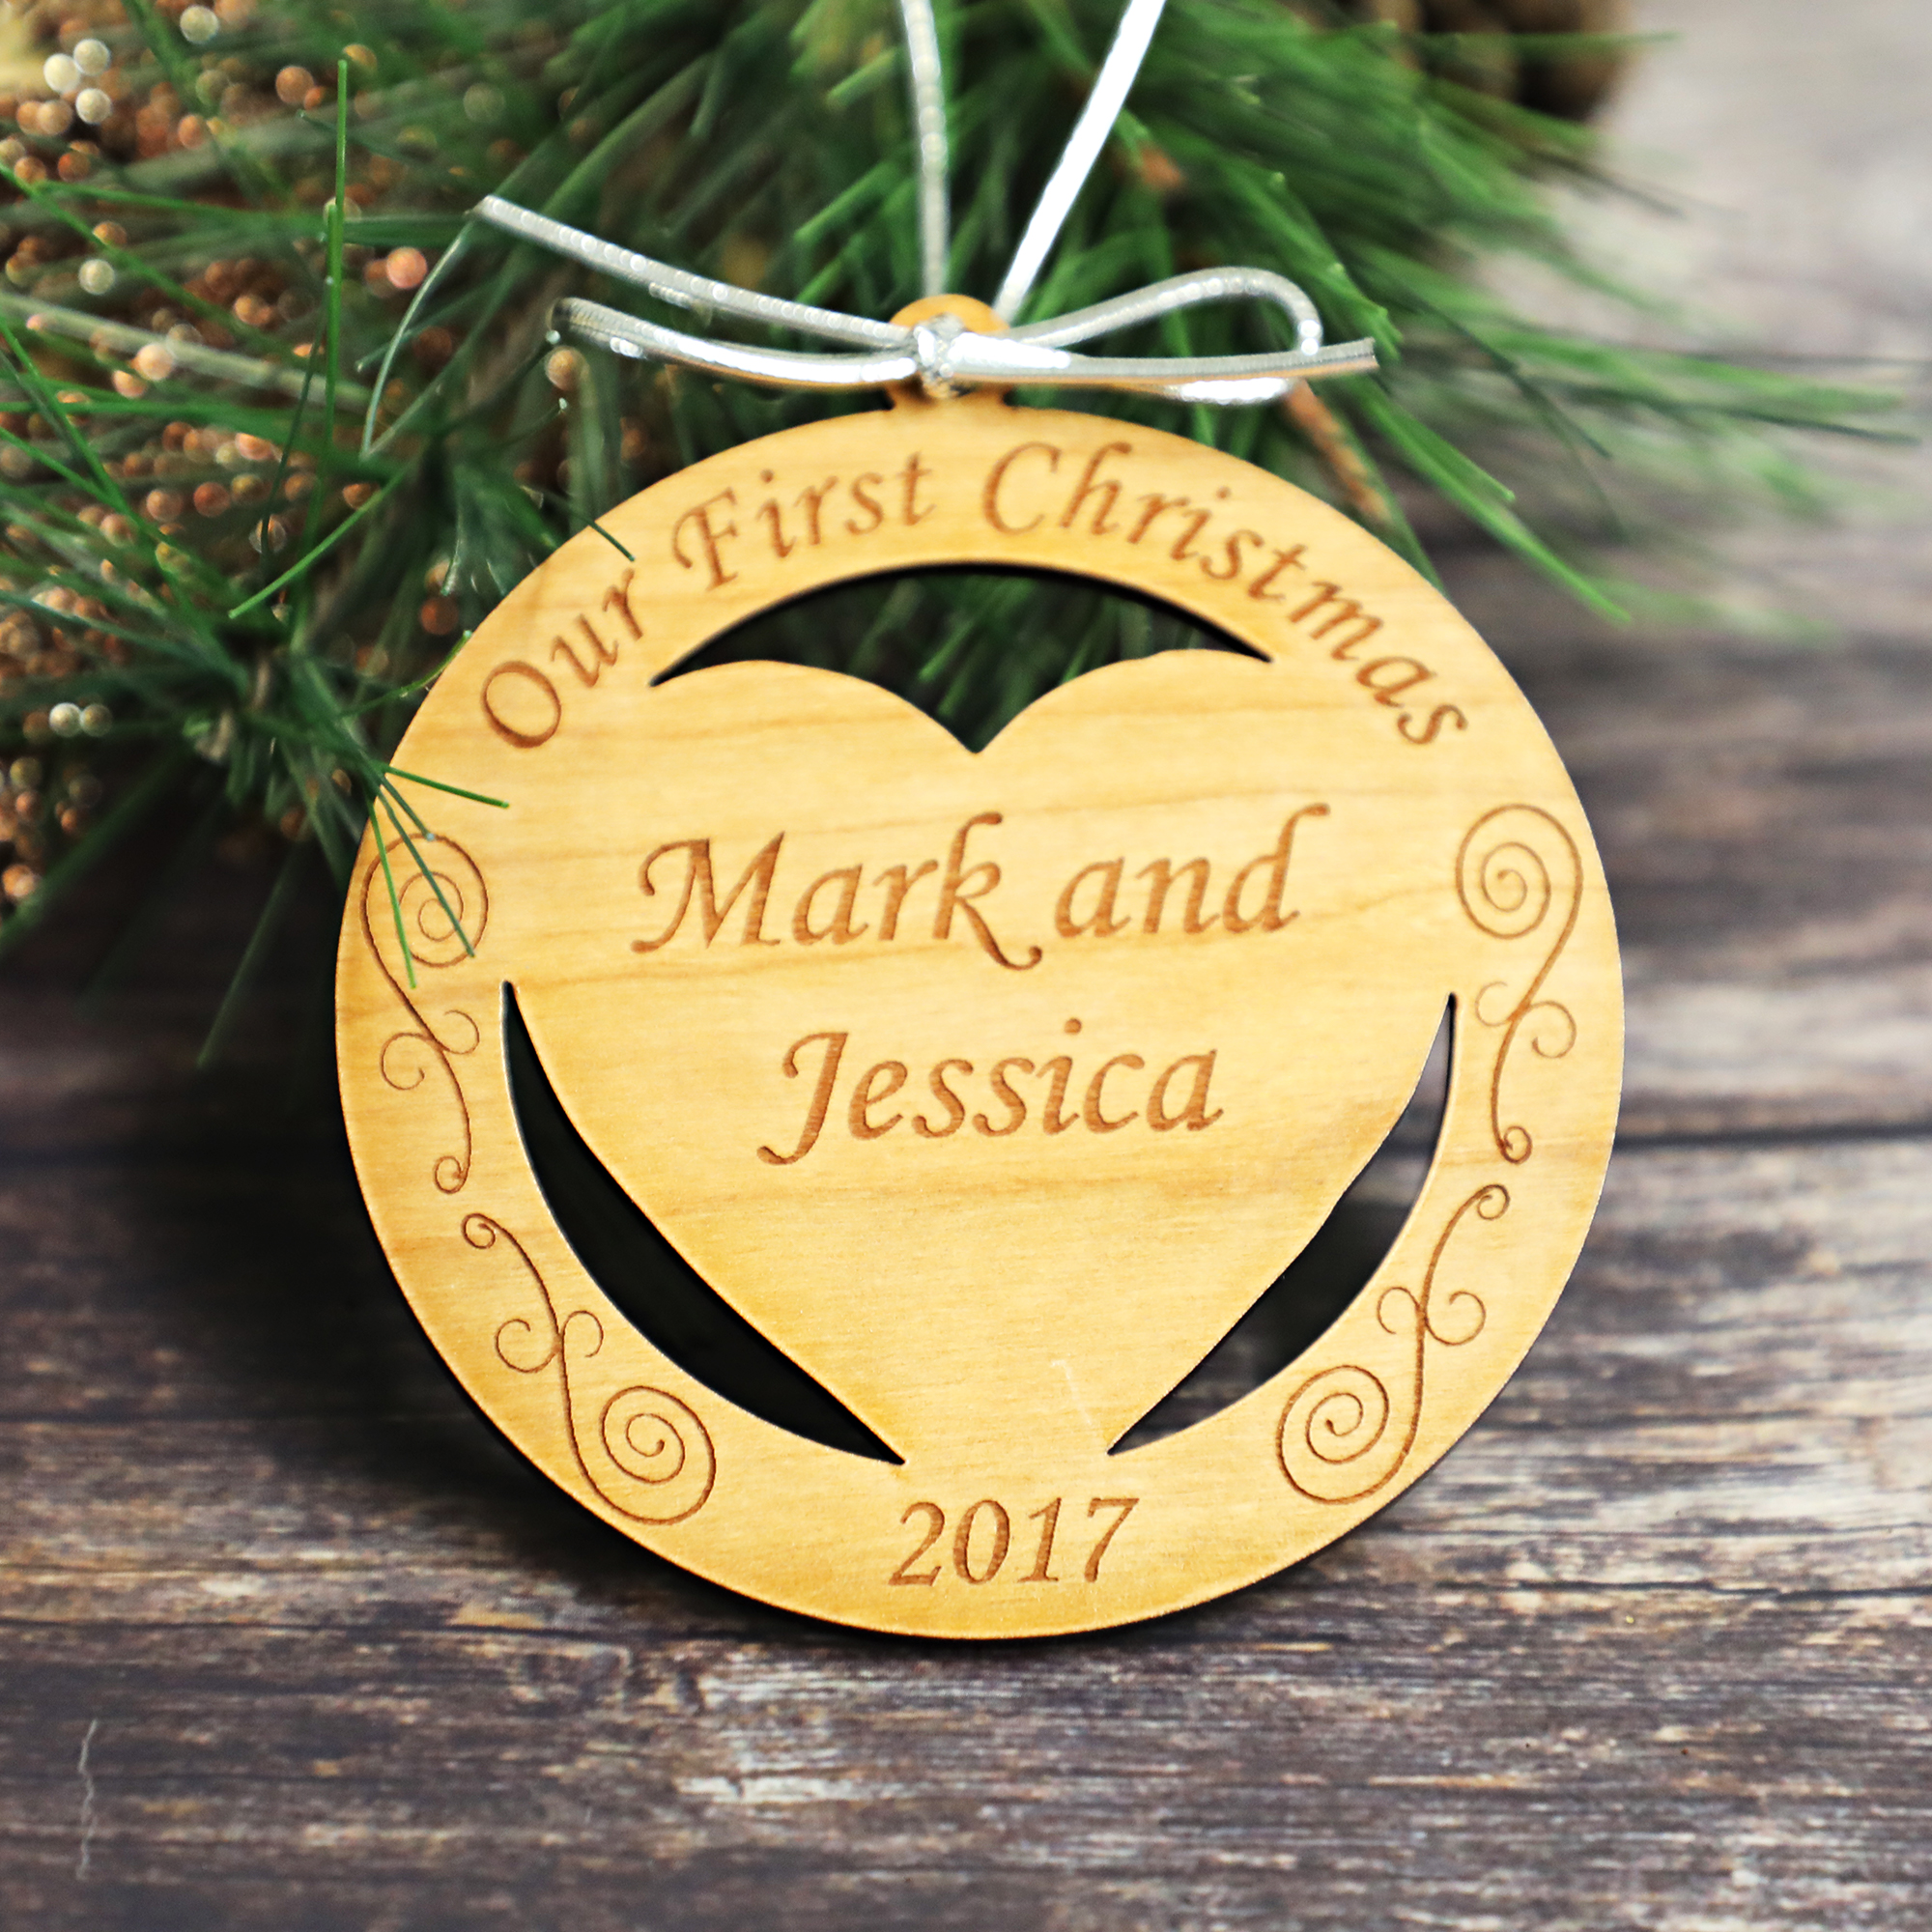 Our First Christmas - Engraved Wood Ornament